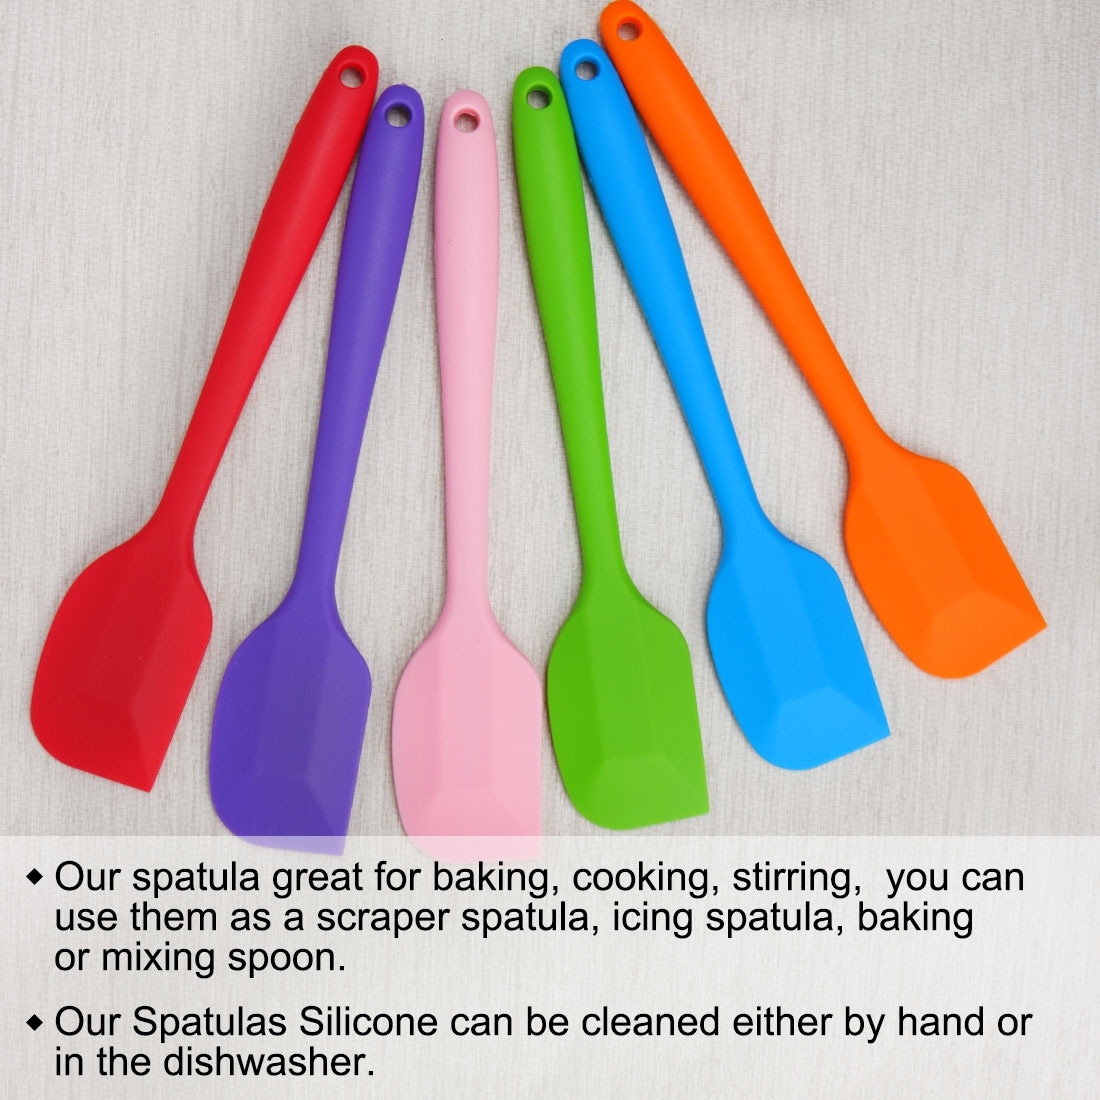 https://ak1.ostkcdn.com/images/products/is/images/direct/e7752463a089f74d2bac5a7e2a472bec0e9cebec/Silicone-Spatula-Heat-Resistant-Kitchen-Turner-Jar-Scraper-Non-Stick-Spatula-for-Cooking-Baking-and-Mixing-Purple.jpg